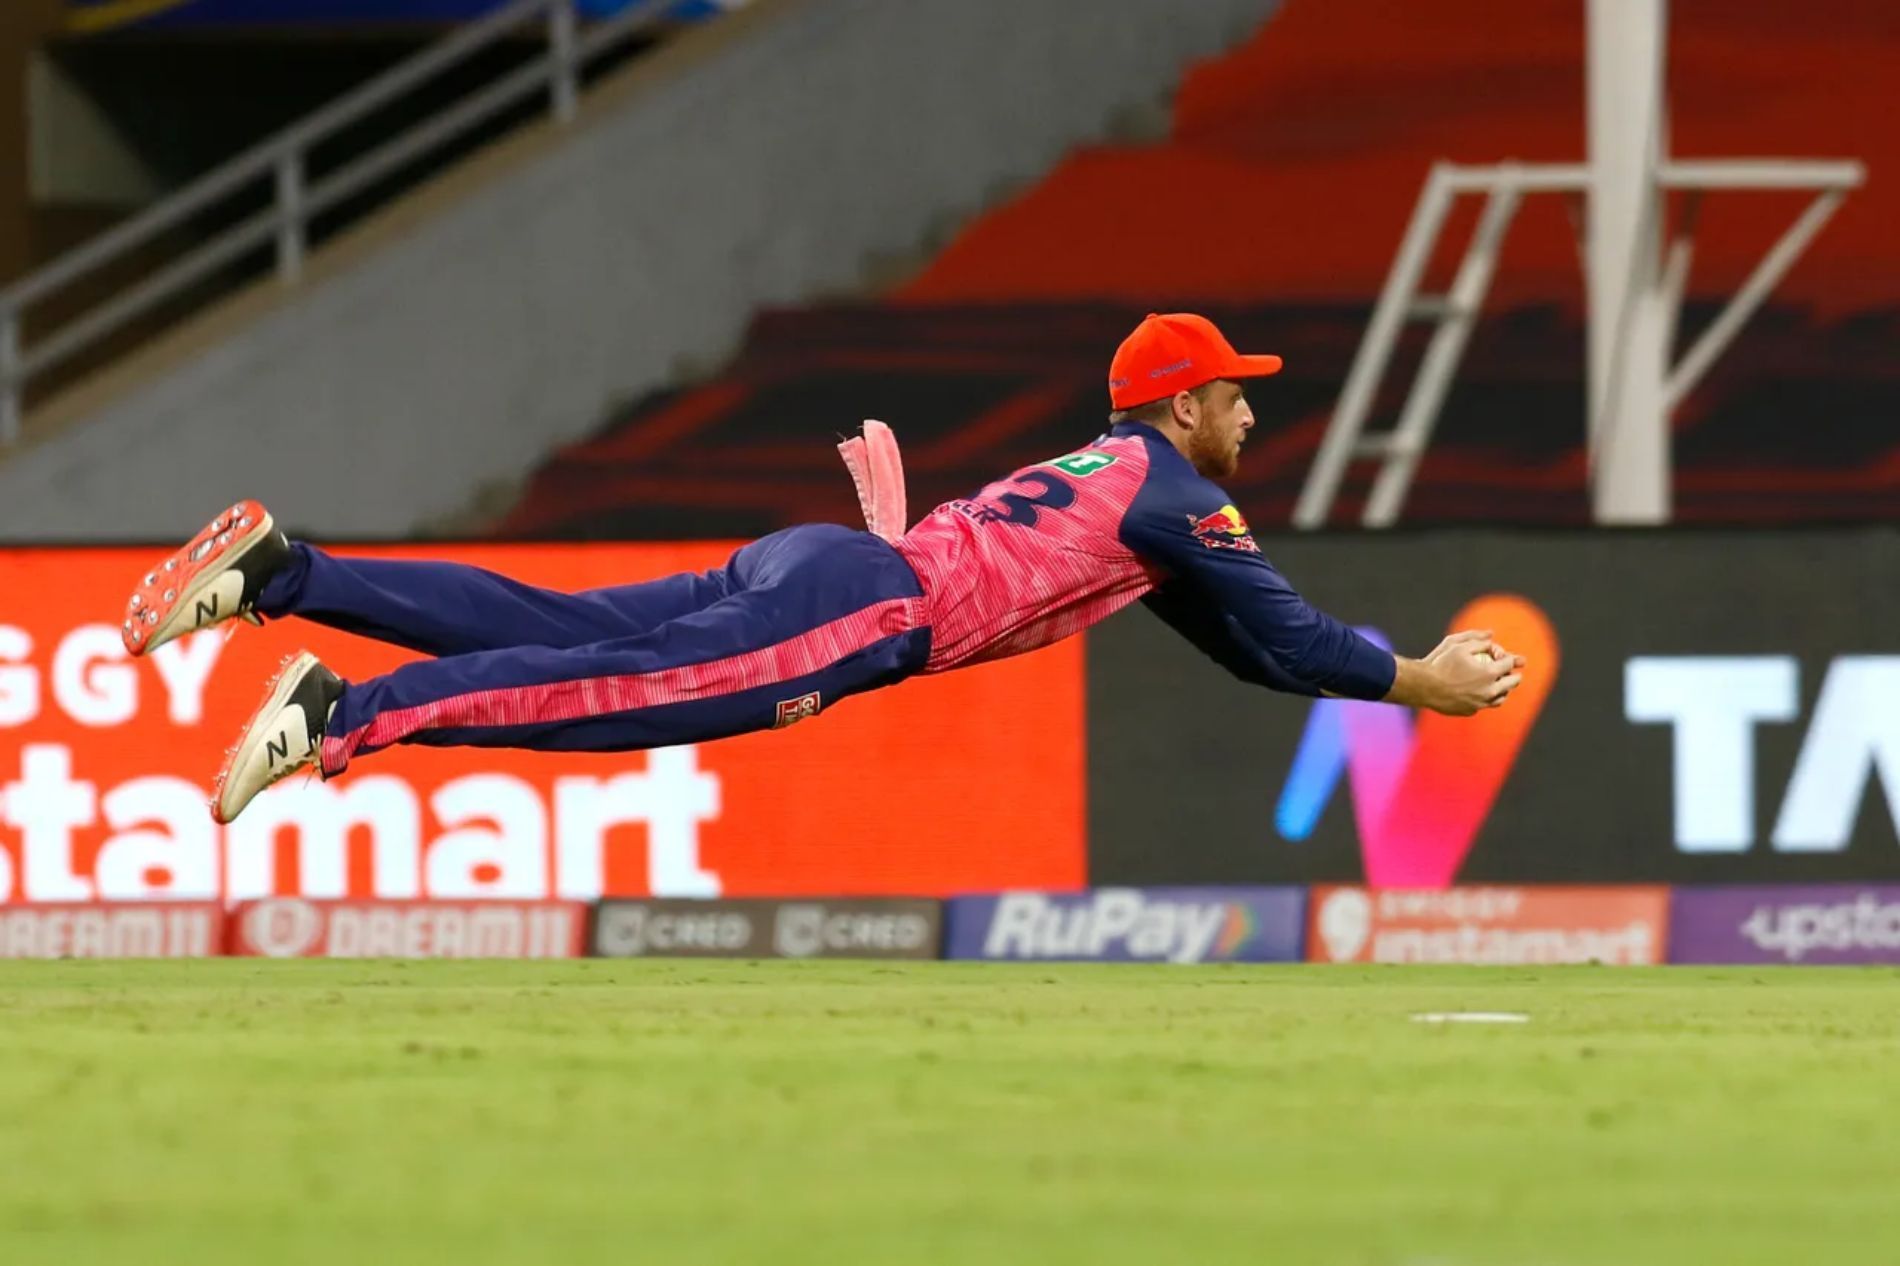 RR&rsquo;s Jos Buttler takes a superb diving catch to dismiss Daniel Sams in Match 9 against Mumbai Indians. The Englishman had earlier scored a 100 off 68 balls.